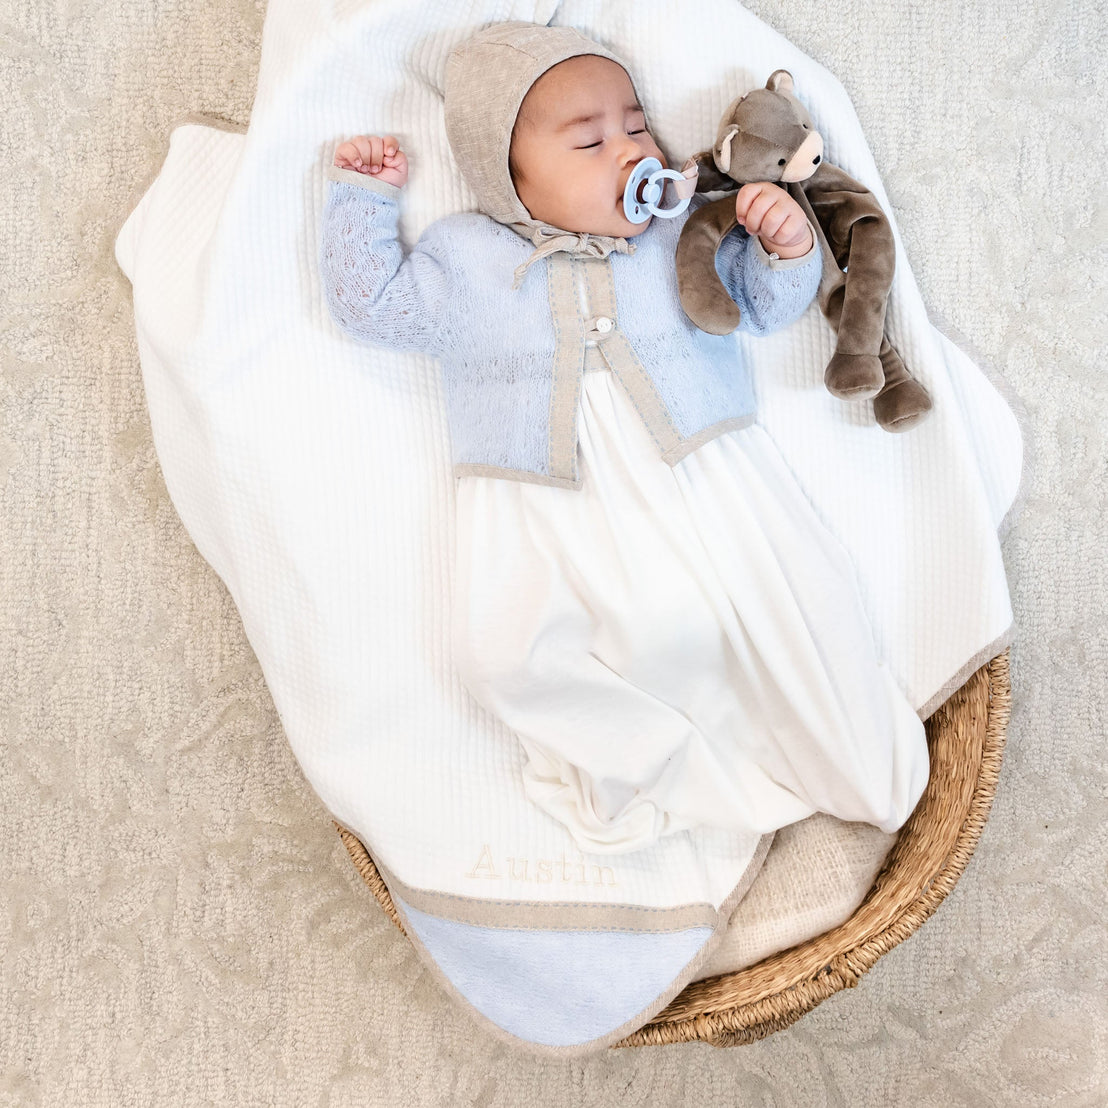 A newborn dressed in an Austin Layette & Hat, heirloom blue and white outfit with a bonnet, lies in a woven basket holding a plush bear. The baby has a pacifier and is on a cozy white blanket.